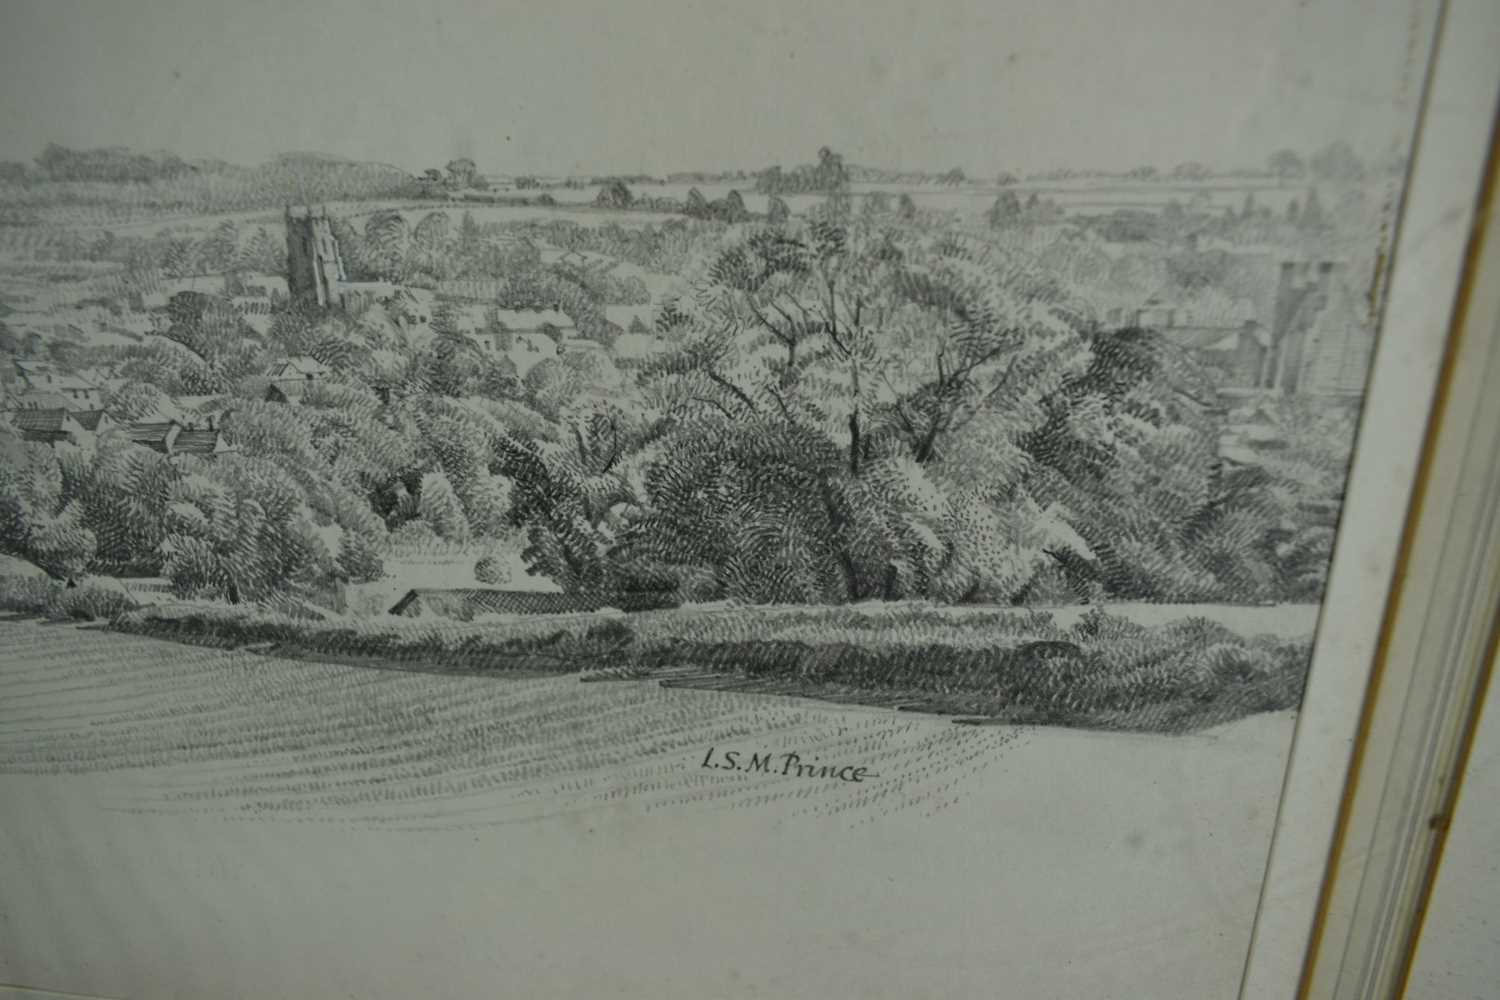 Louis Prince (act.1923-1959) pencil on paper - Sudbury from the Top of Ballingdon Hill, c.1960, sign - Image 2 of 6